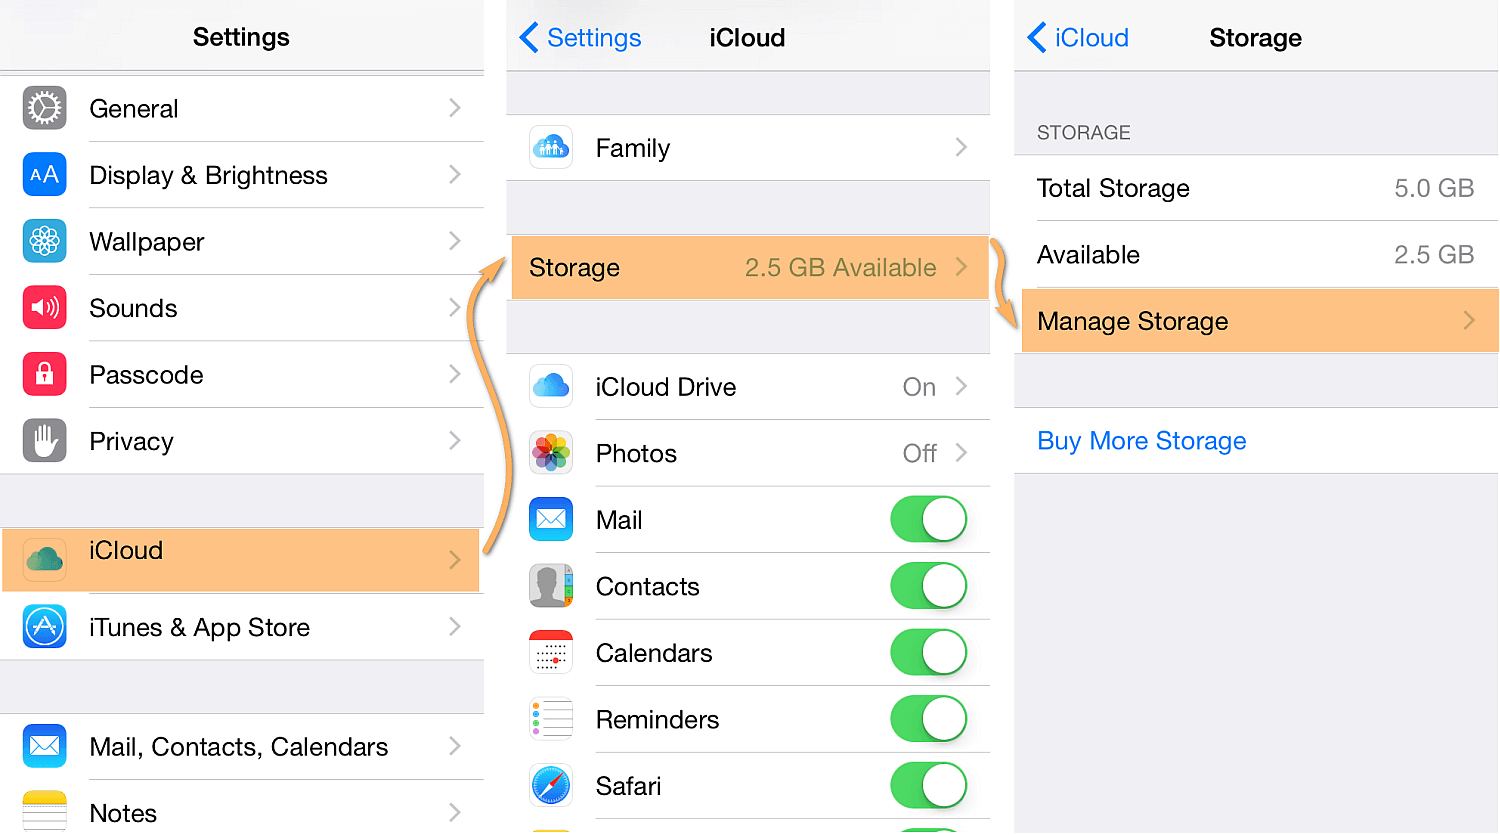 How Much Storage Do I Need On My iPhone or iPad?